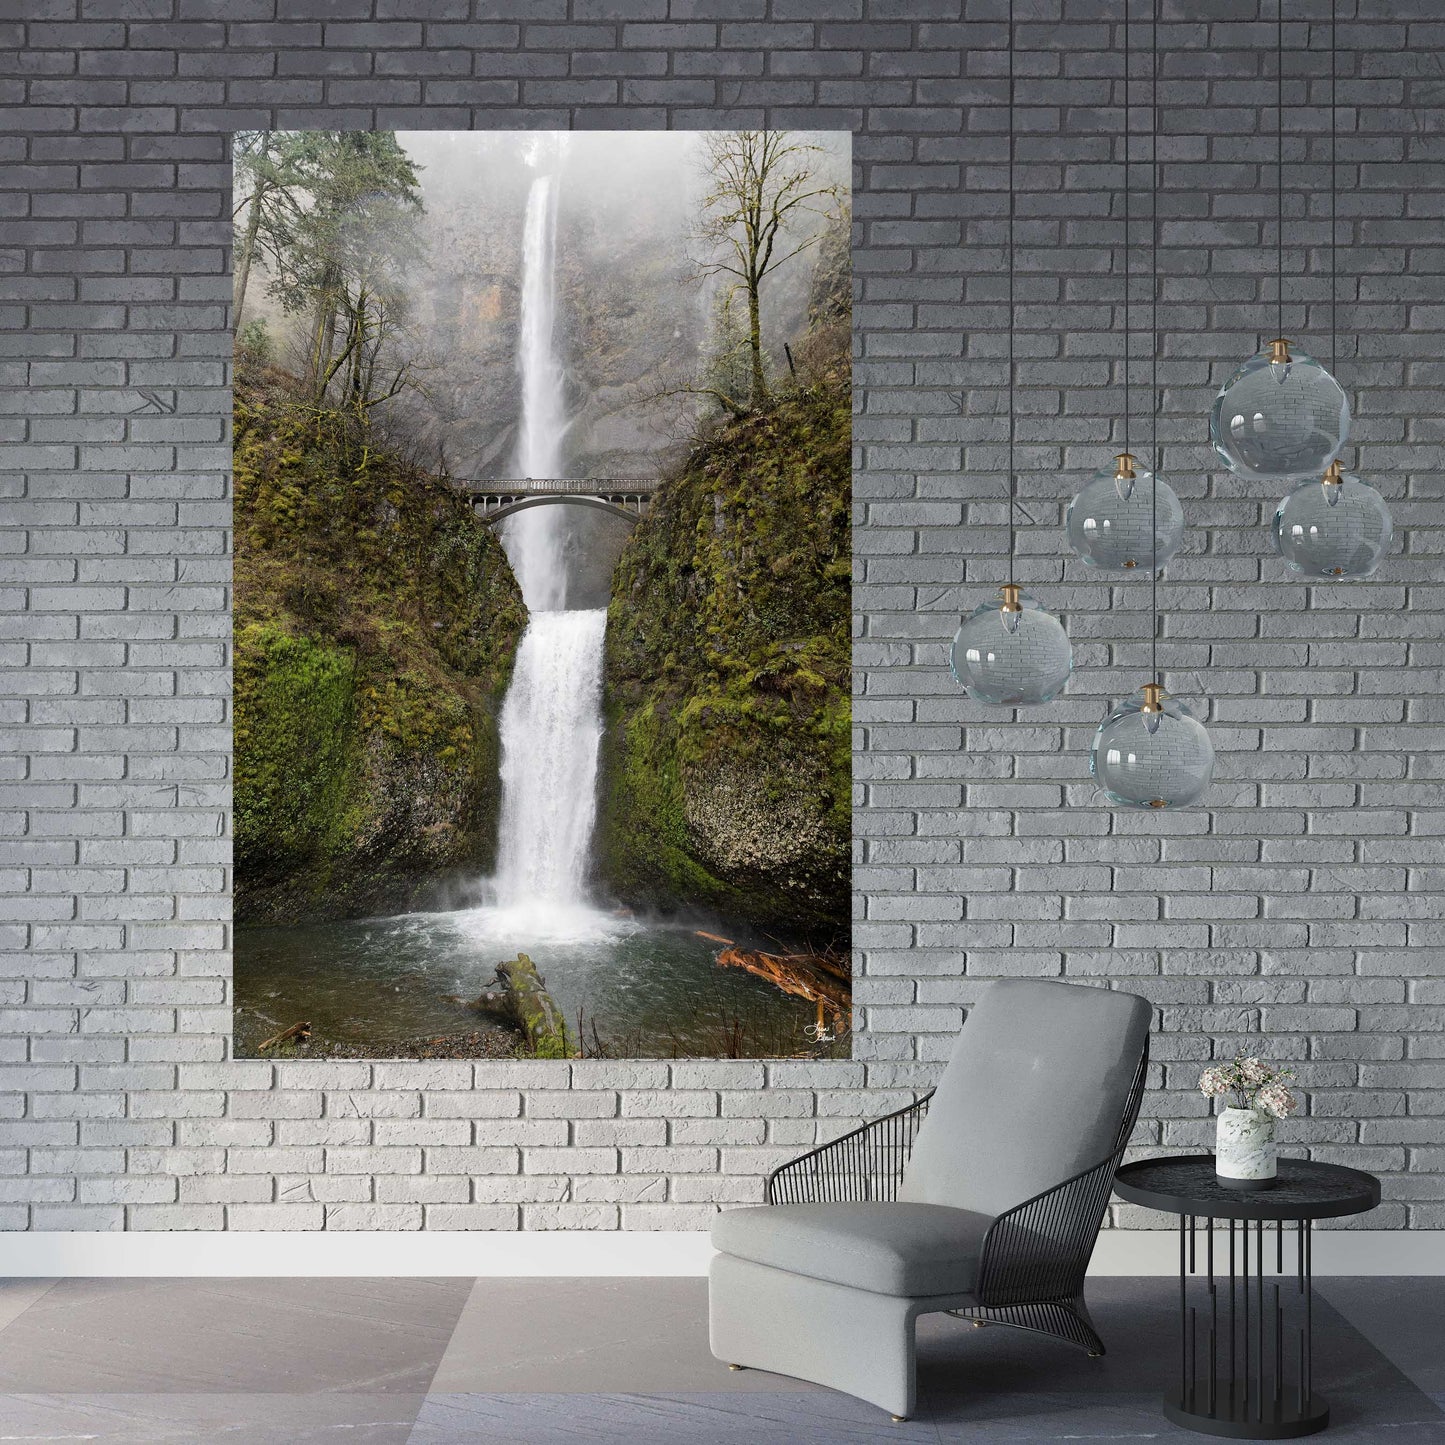 Large wall art of Multnomah Falls Oregon displayed in room with light grey brick wall